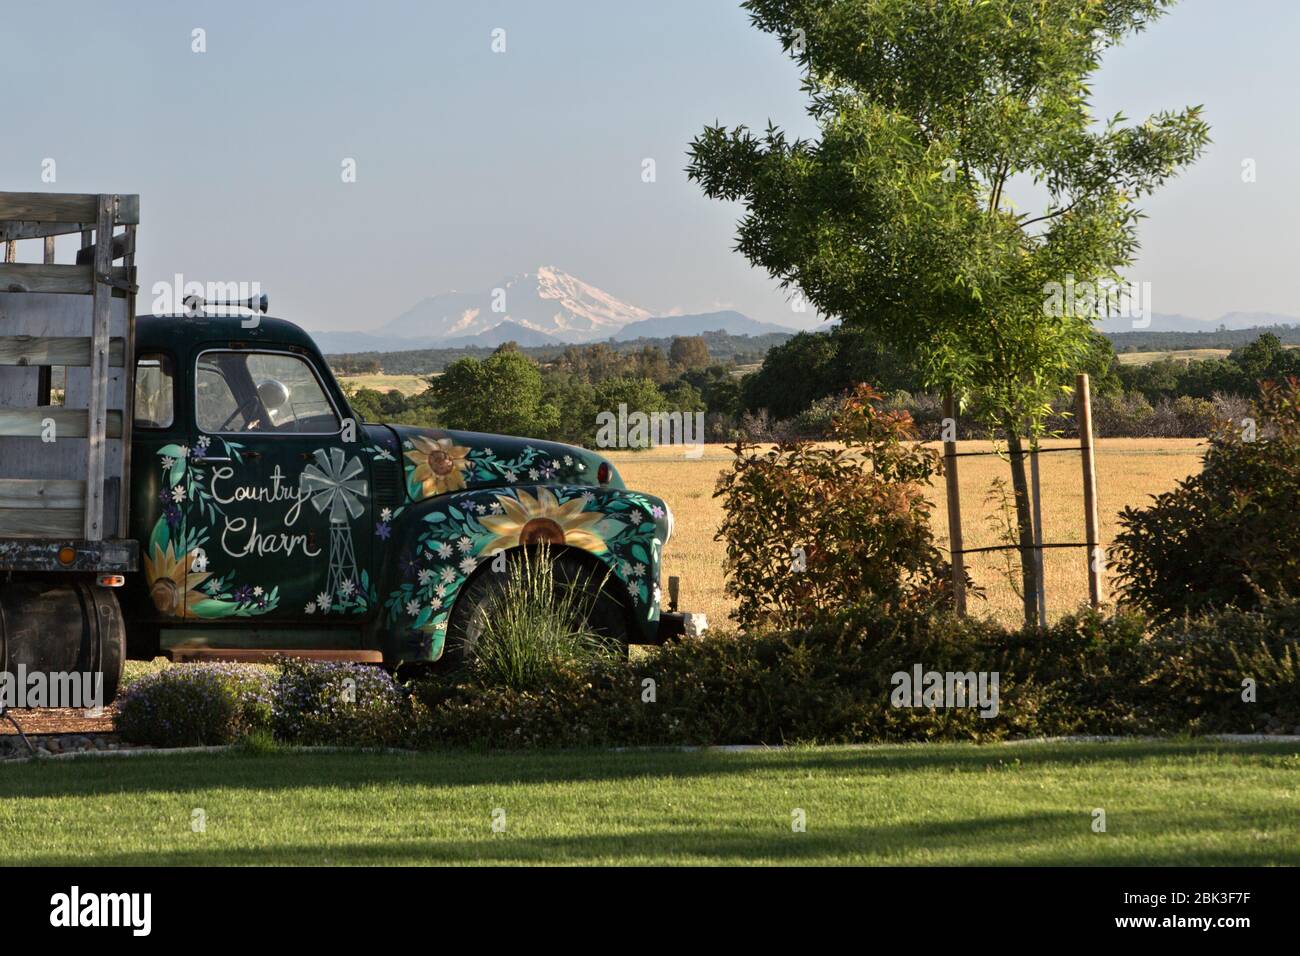 Decorated Classic 1950 Chevrolet Stake Bed Truck, view of  Mount Shasta. Stock Photo